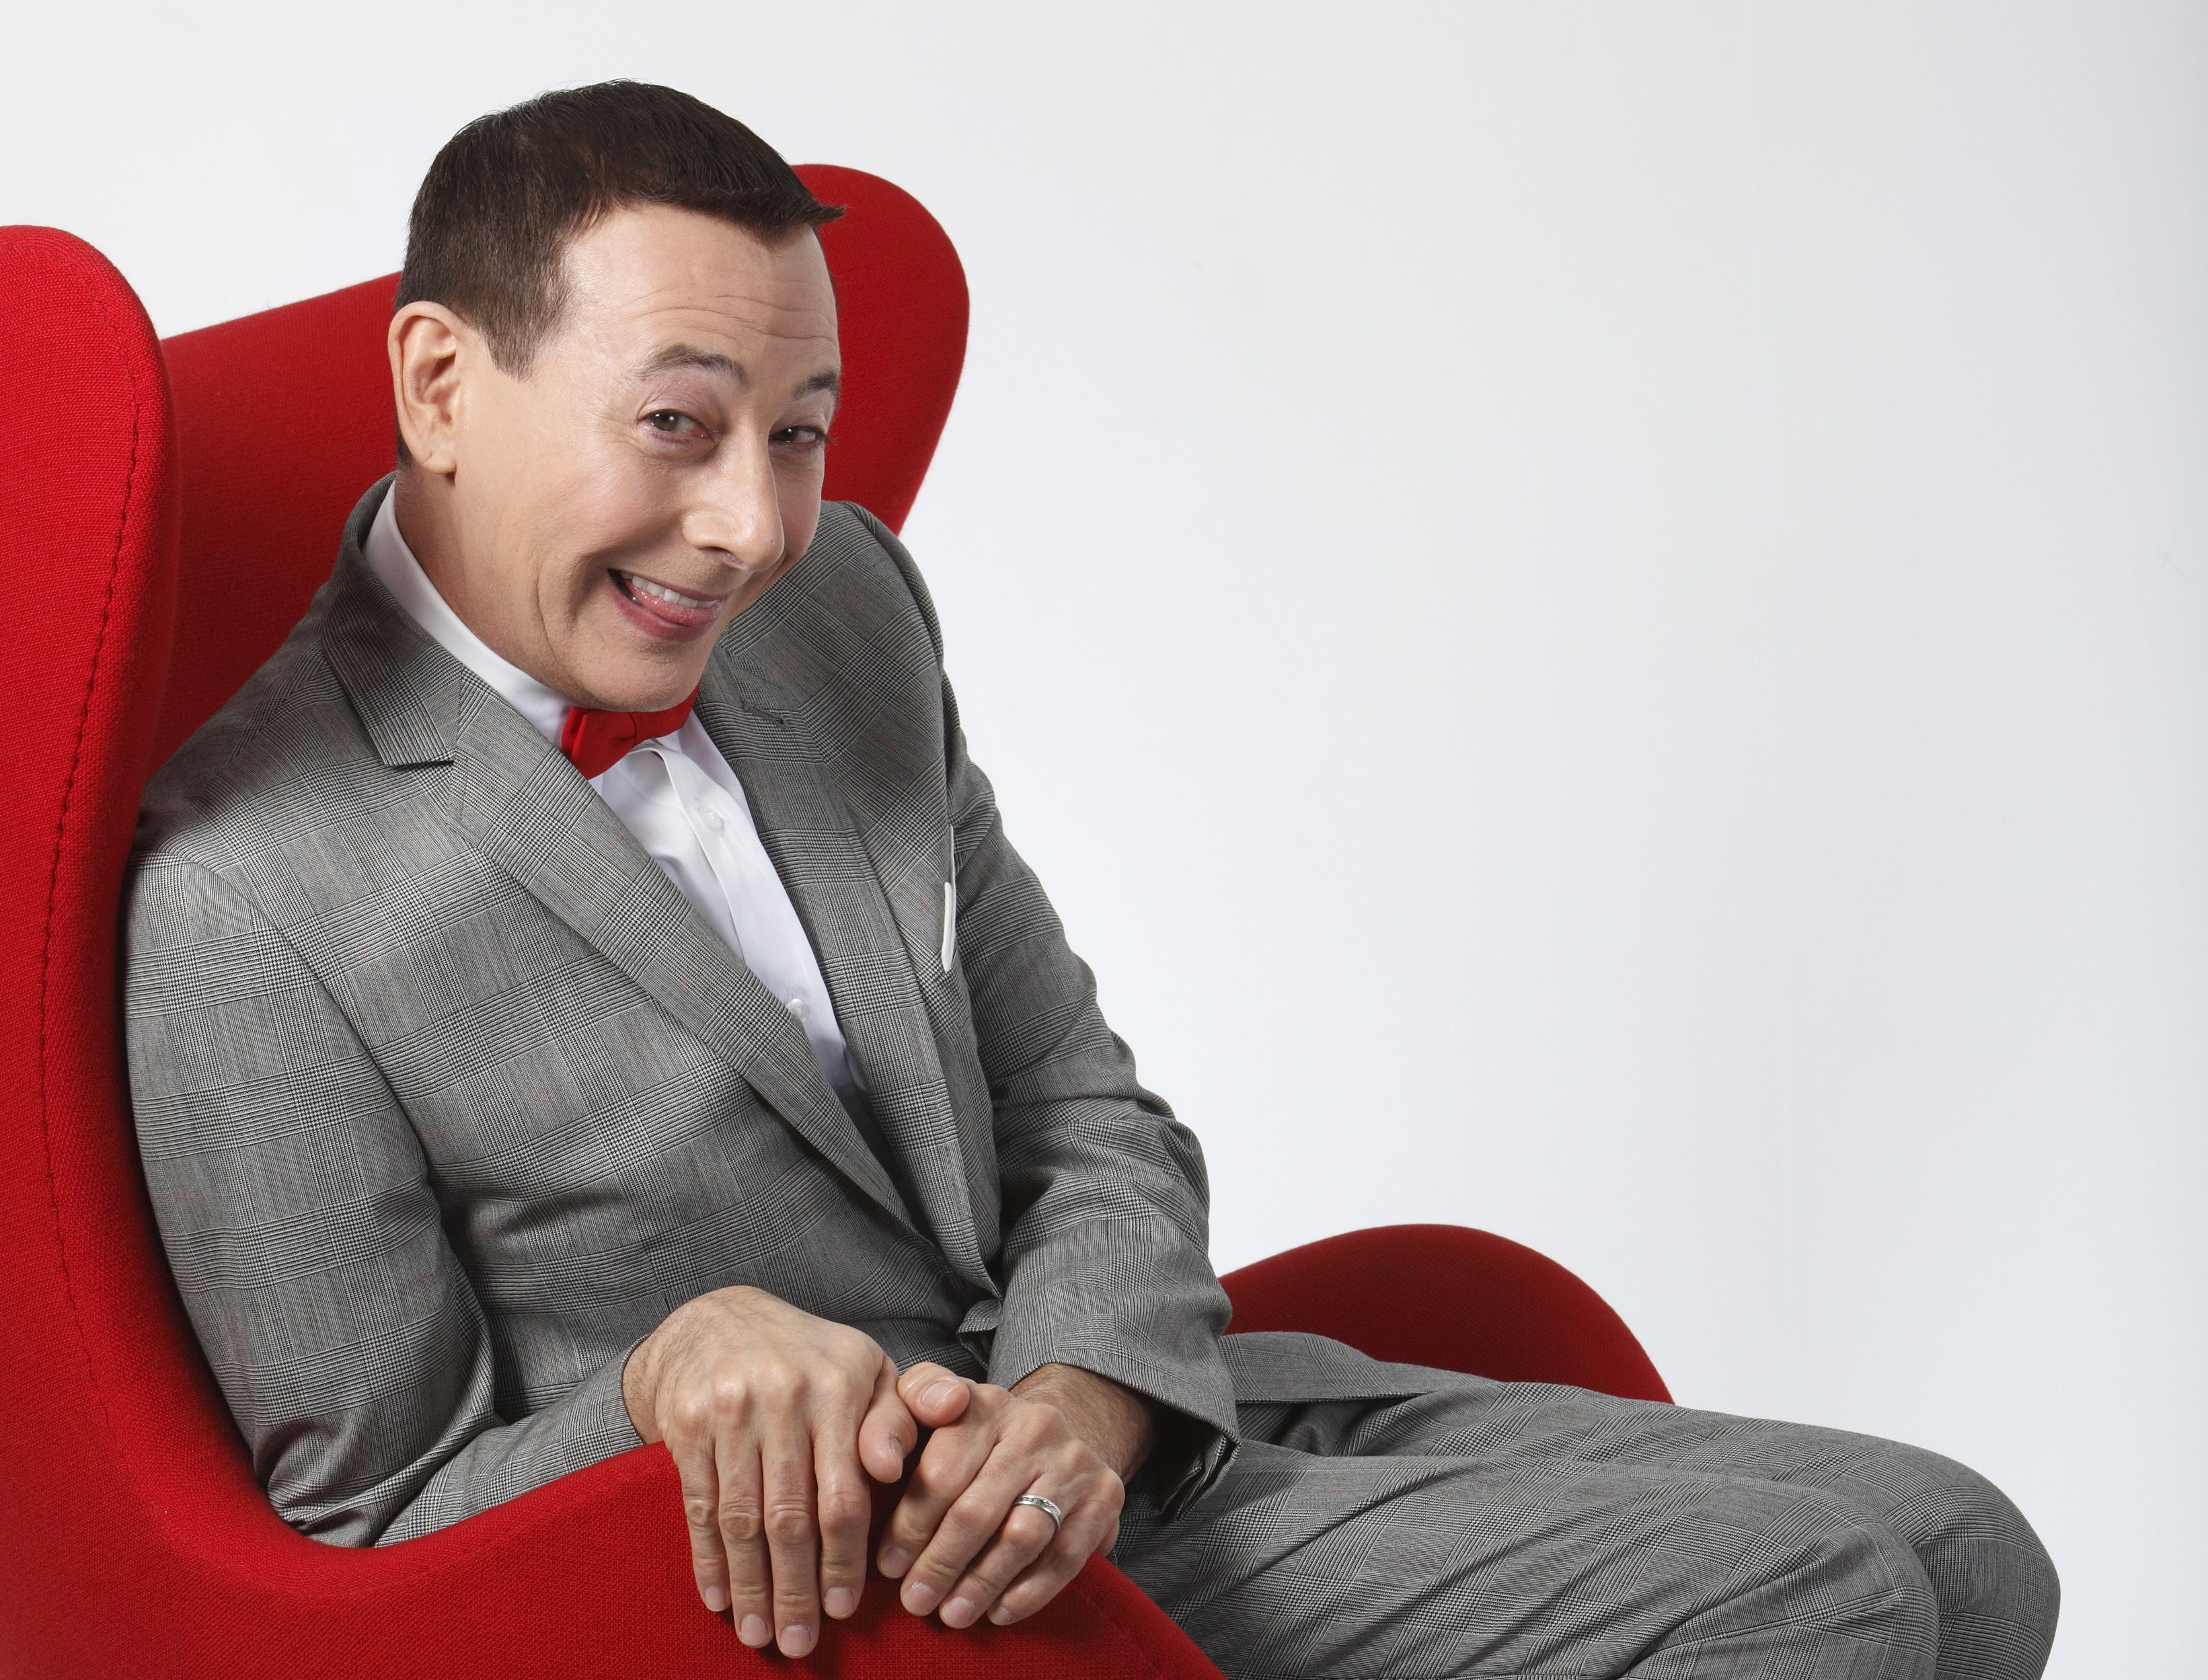 Pee-wee Herman is back for the long haul - The Blade